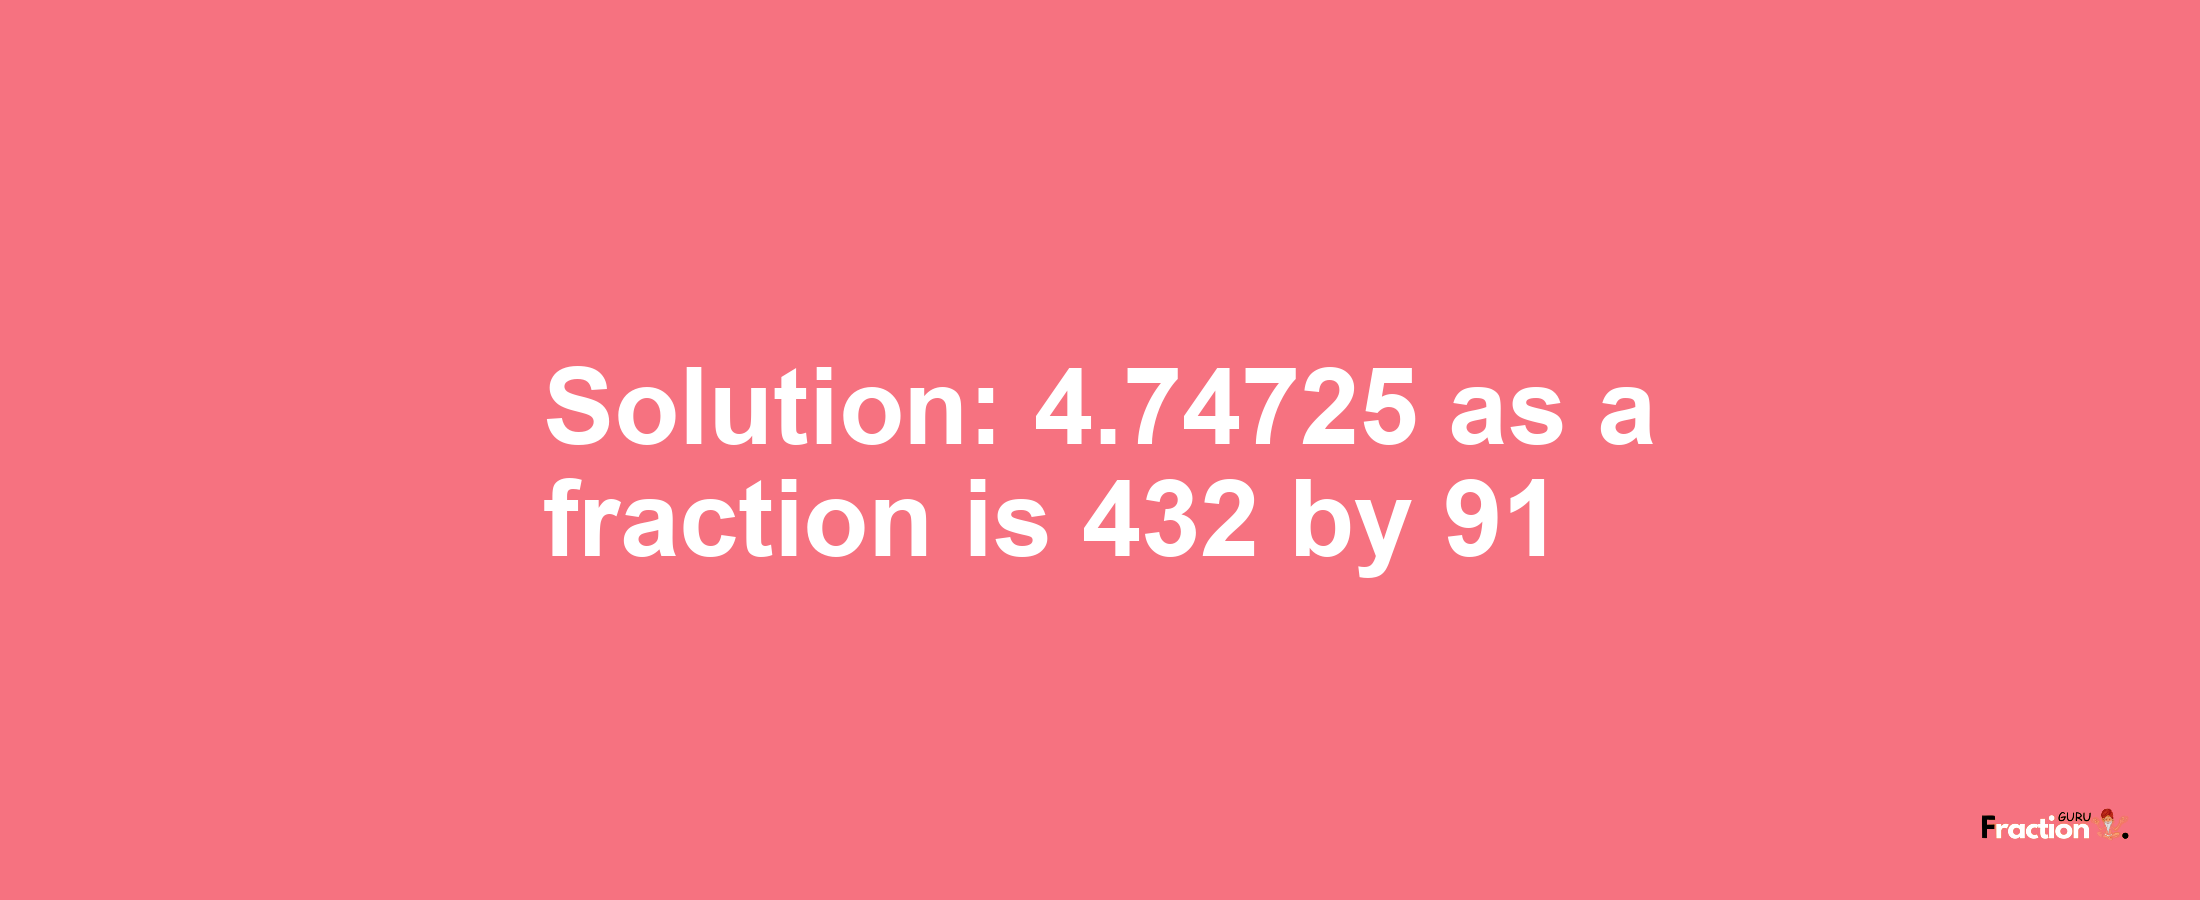 Solution:4.74725 as a fraction is 432/91